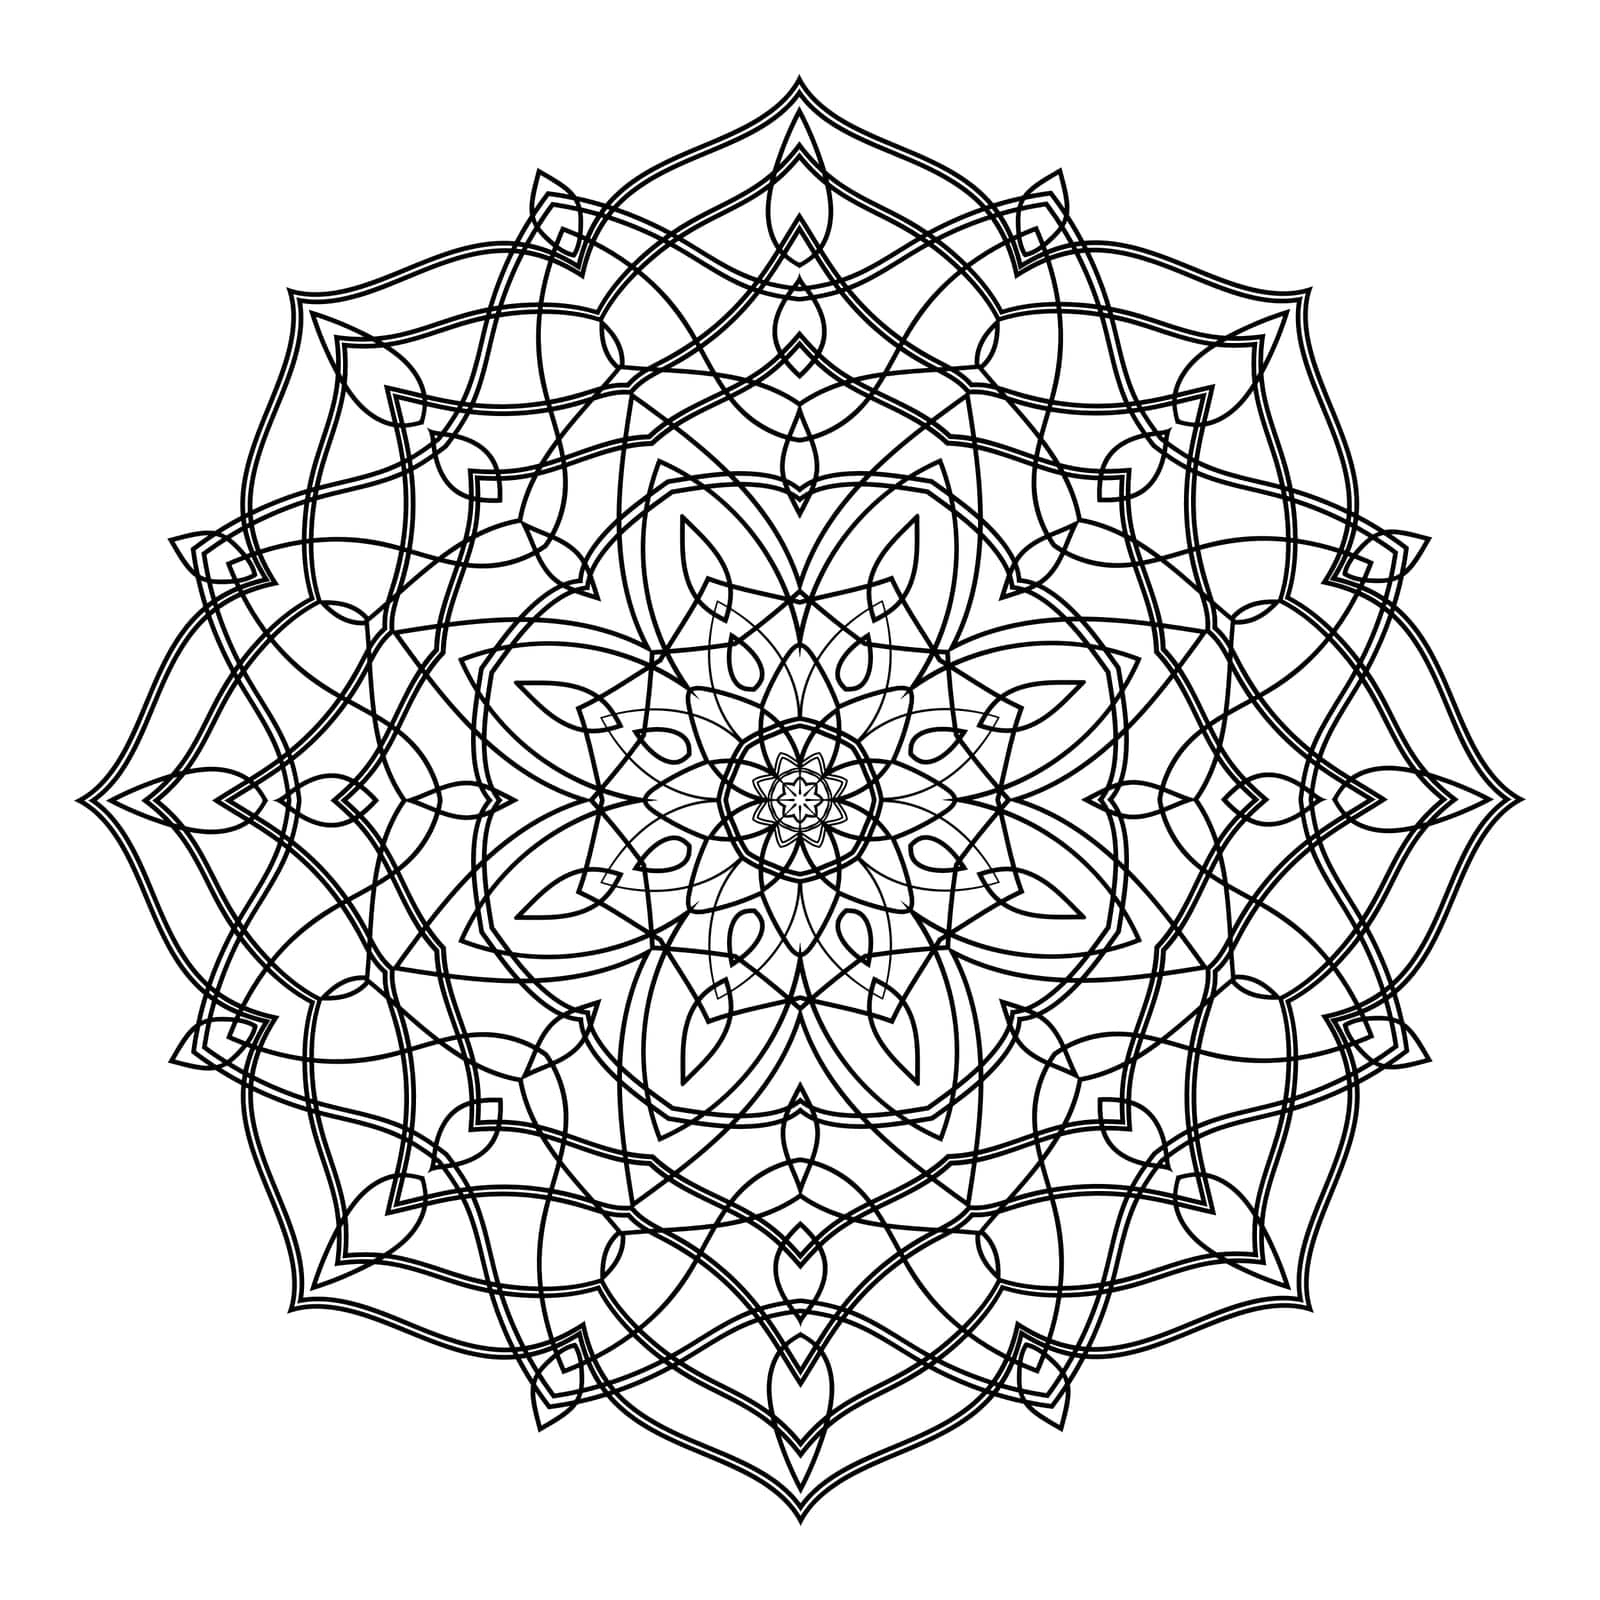 Hand drawn circular floral mandala pattern for Henna, Mehndi, tattoo, decoration. Decorative ornament in ethnic oriental style. Outline doodle hand draw vector anti-stress